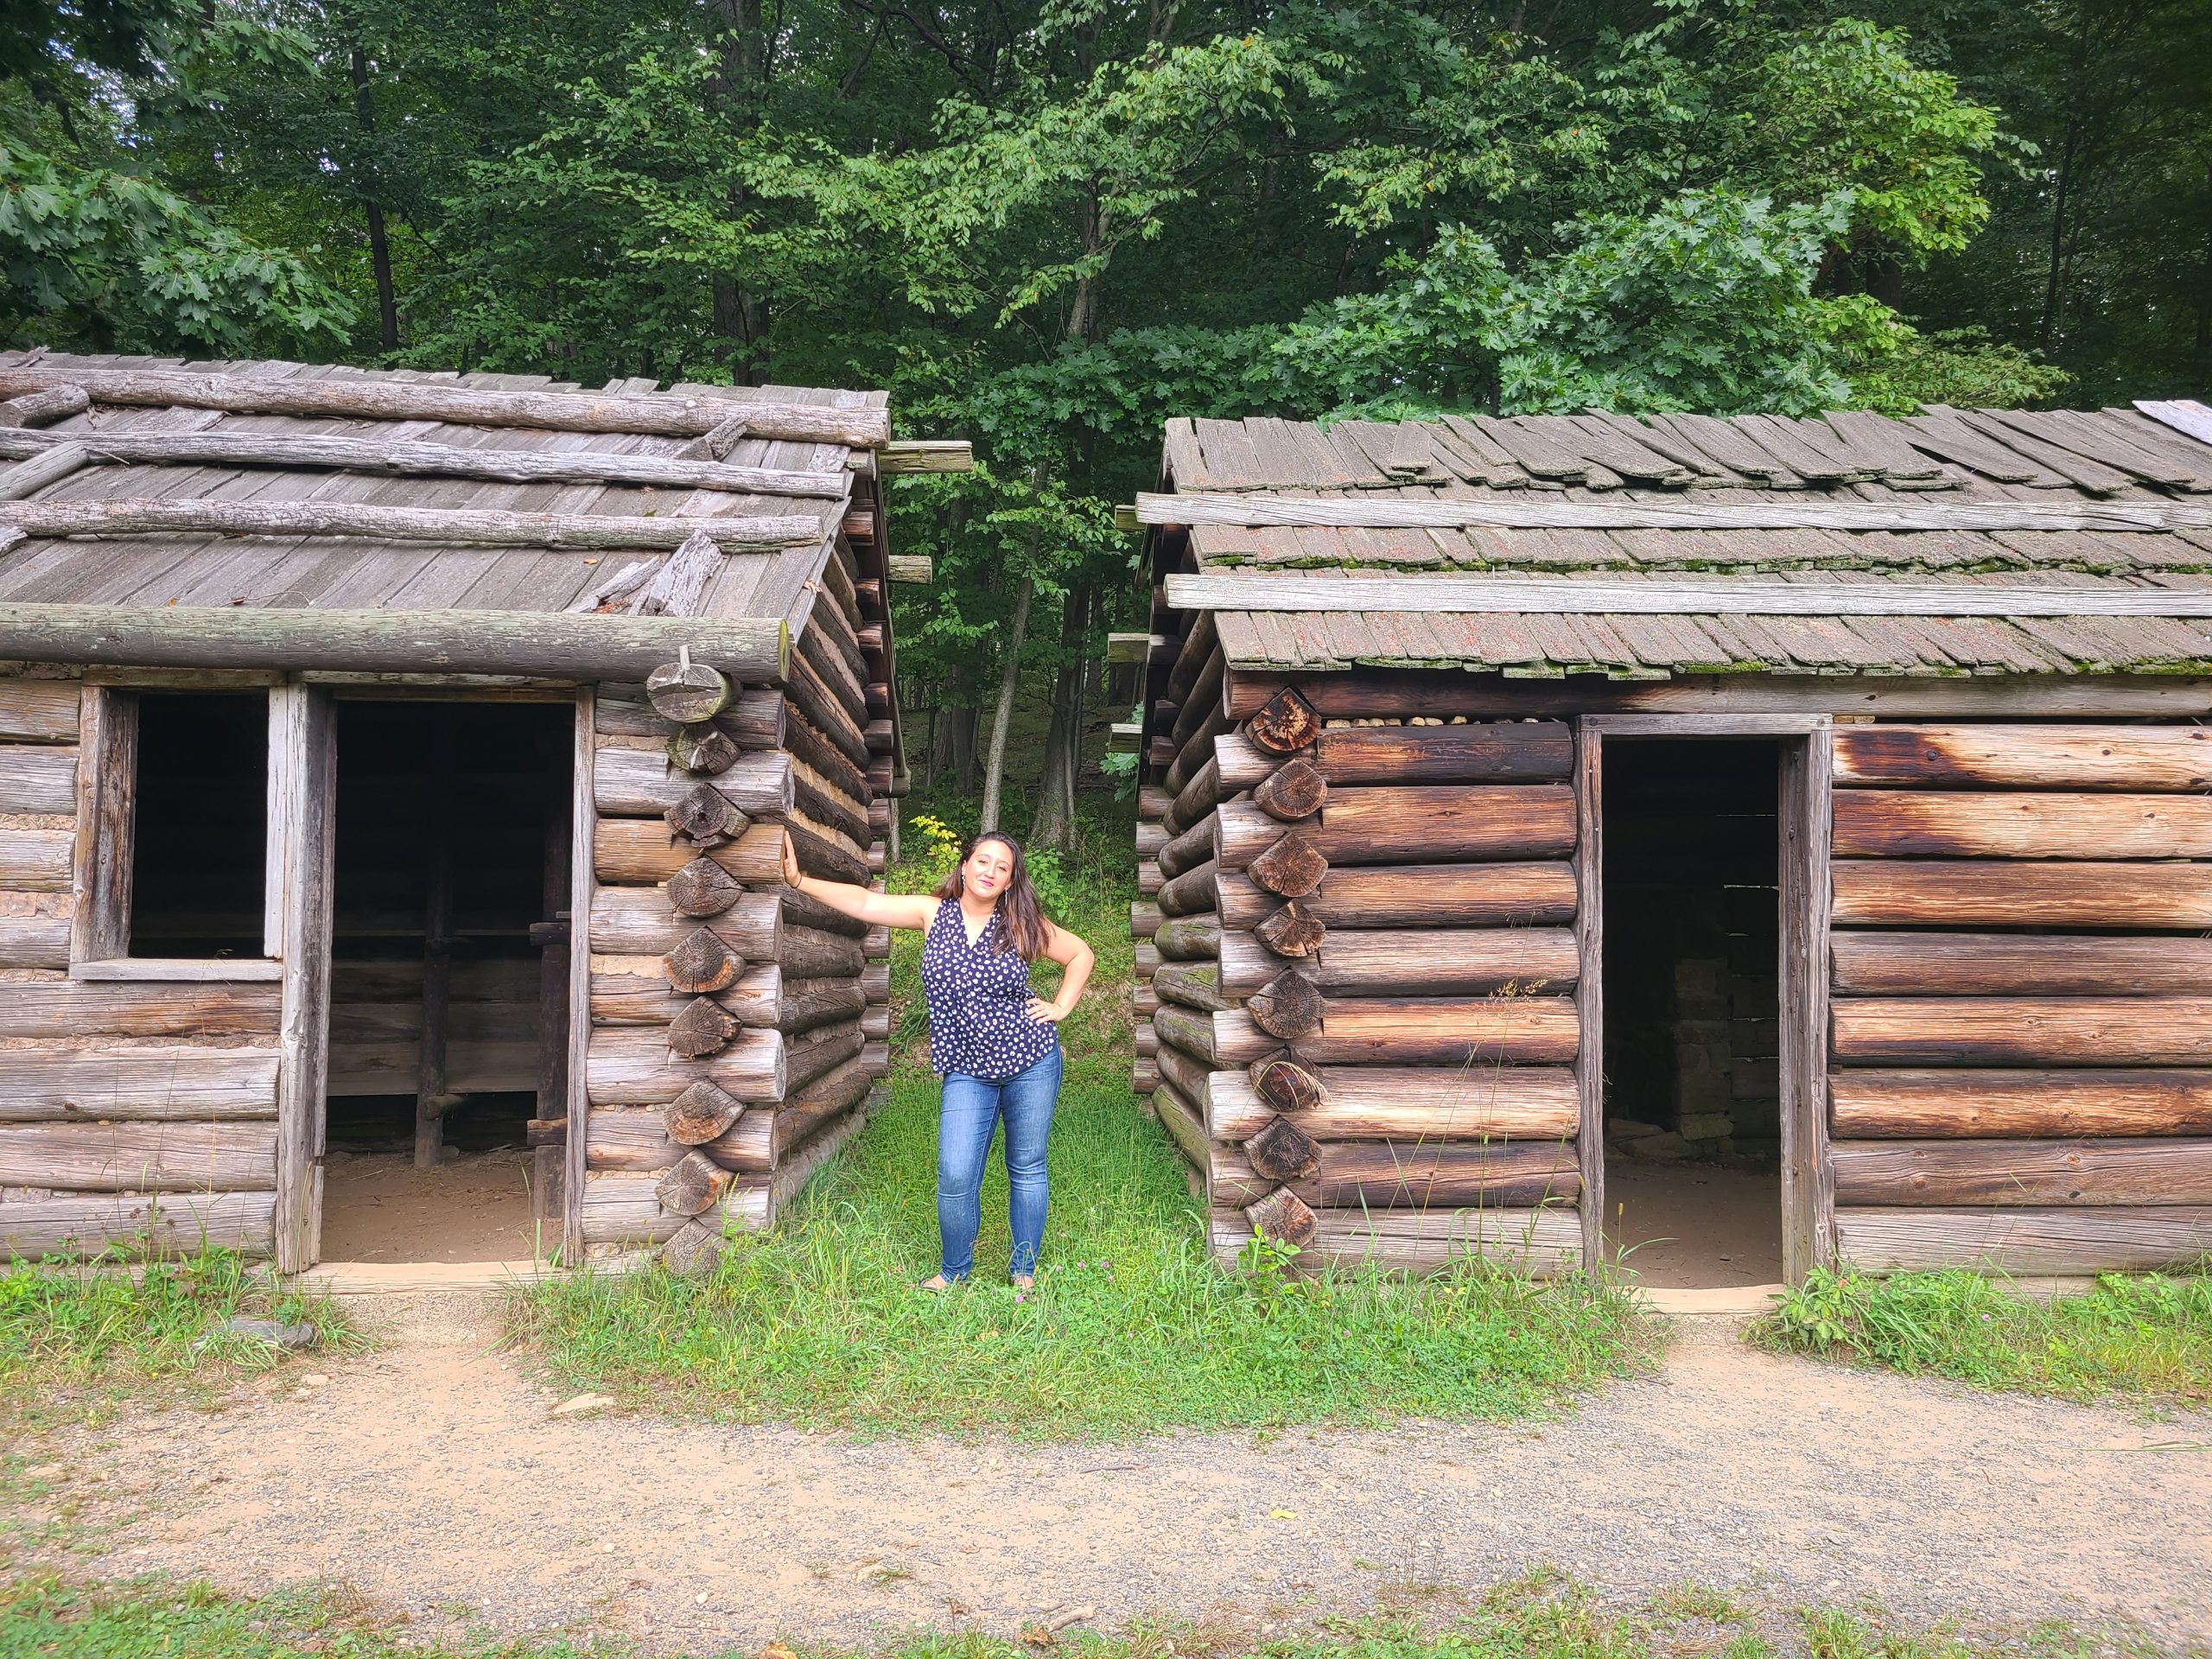 A woman poses inbetween two cabins in Jockey Hollow Park